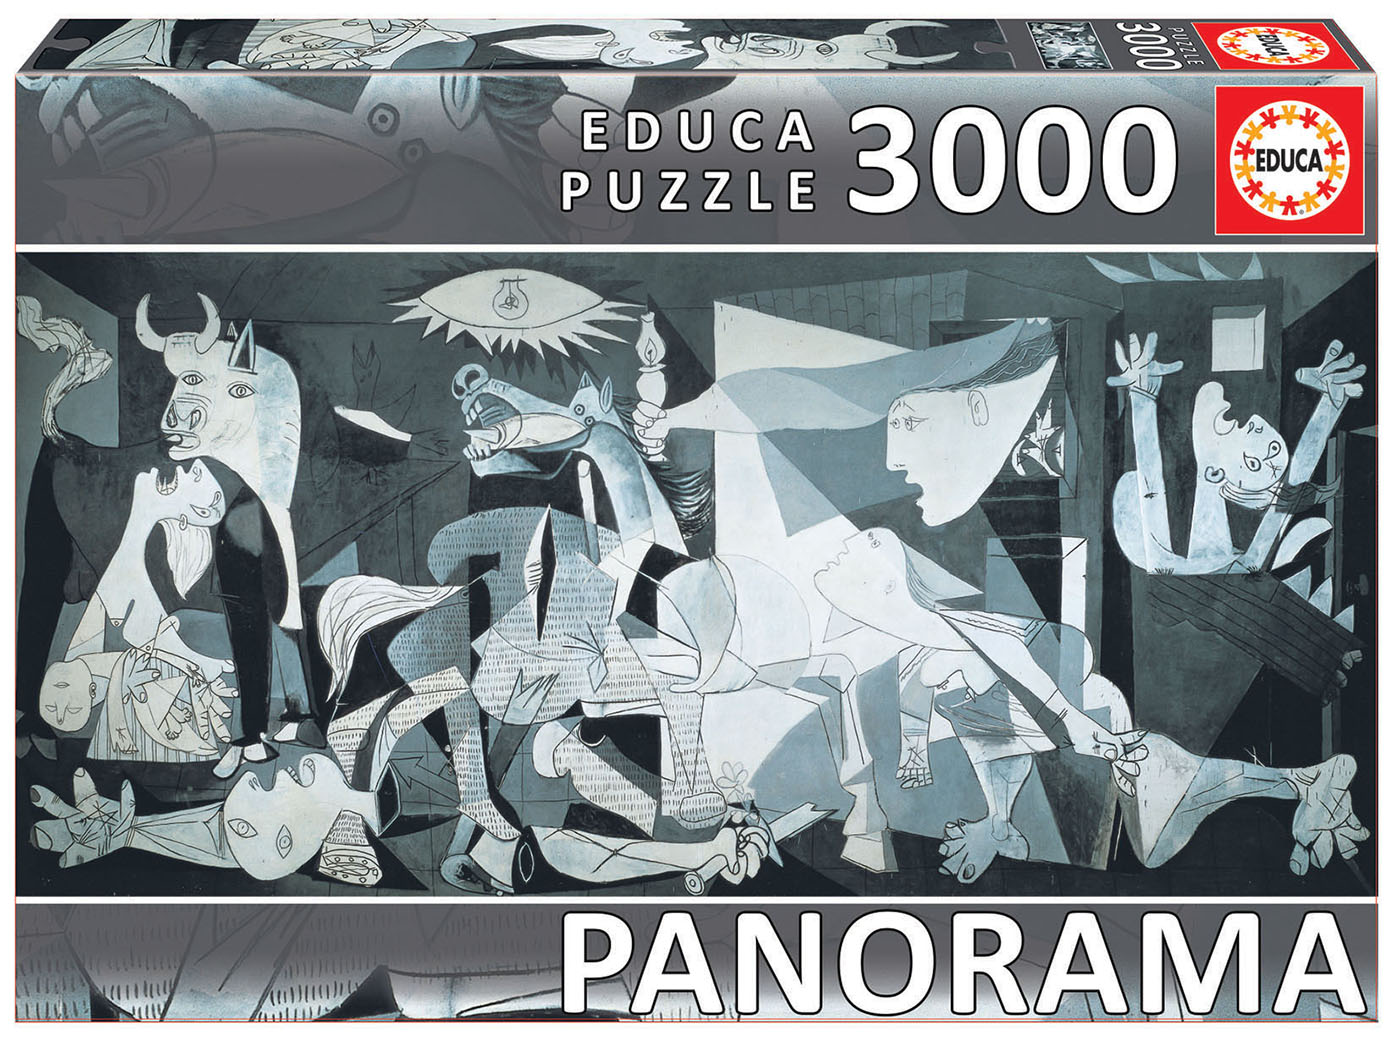 3000 Guernica, P. Picasso “Panorama”